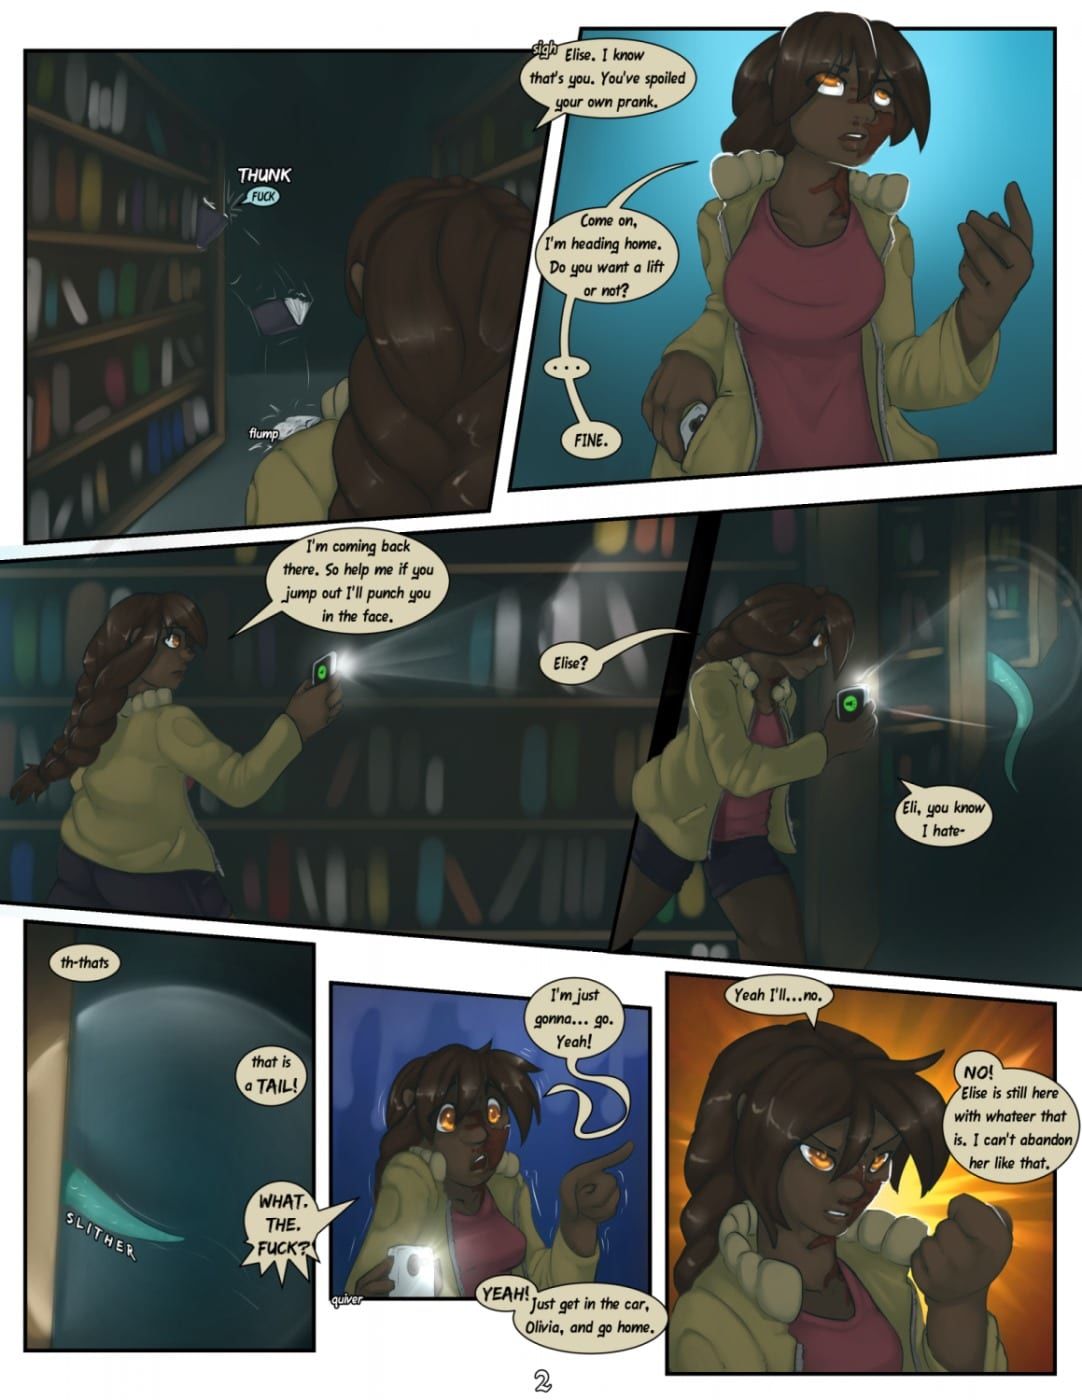 Draekos - Turning Pages 2, Furry Cartoon page 3